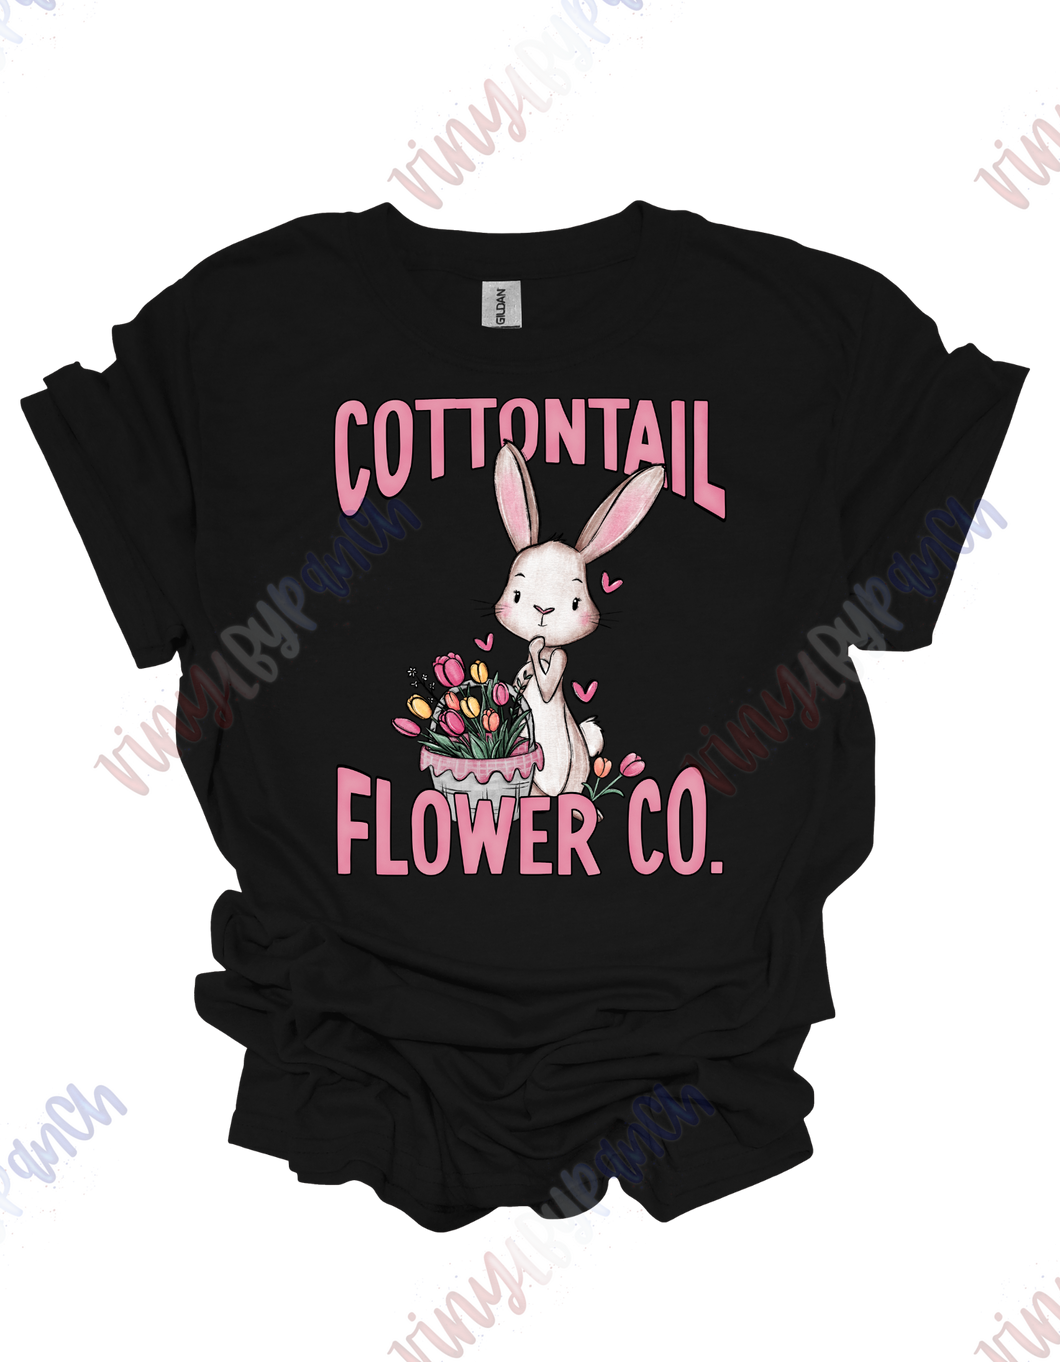 Cottontail Flower Co.